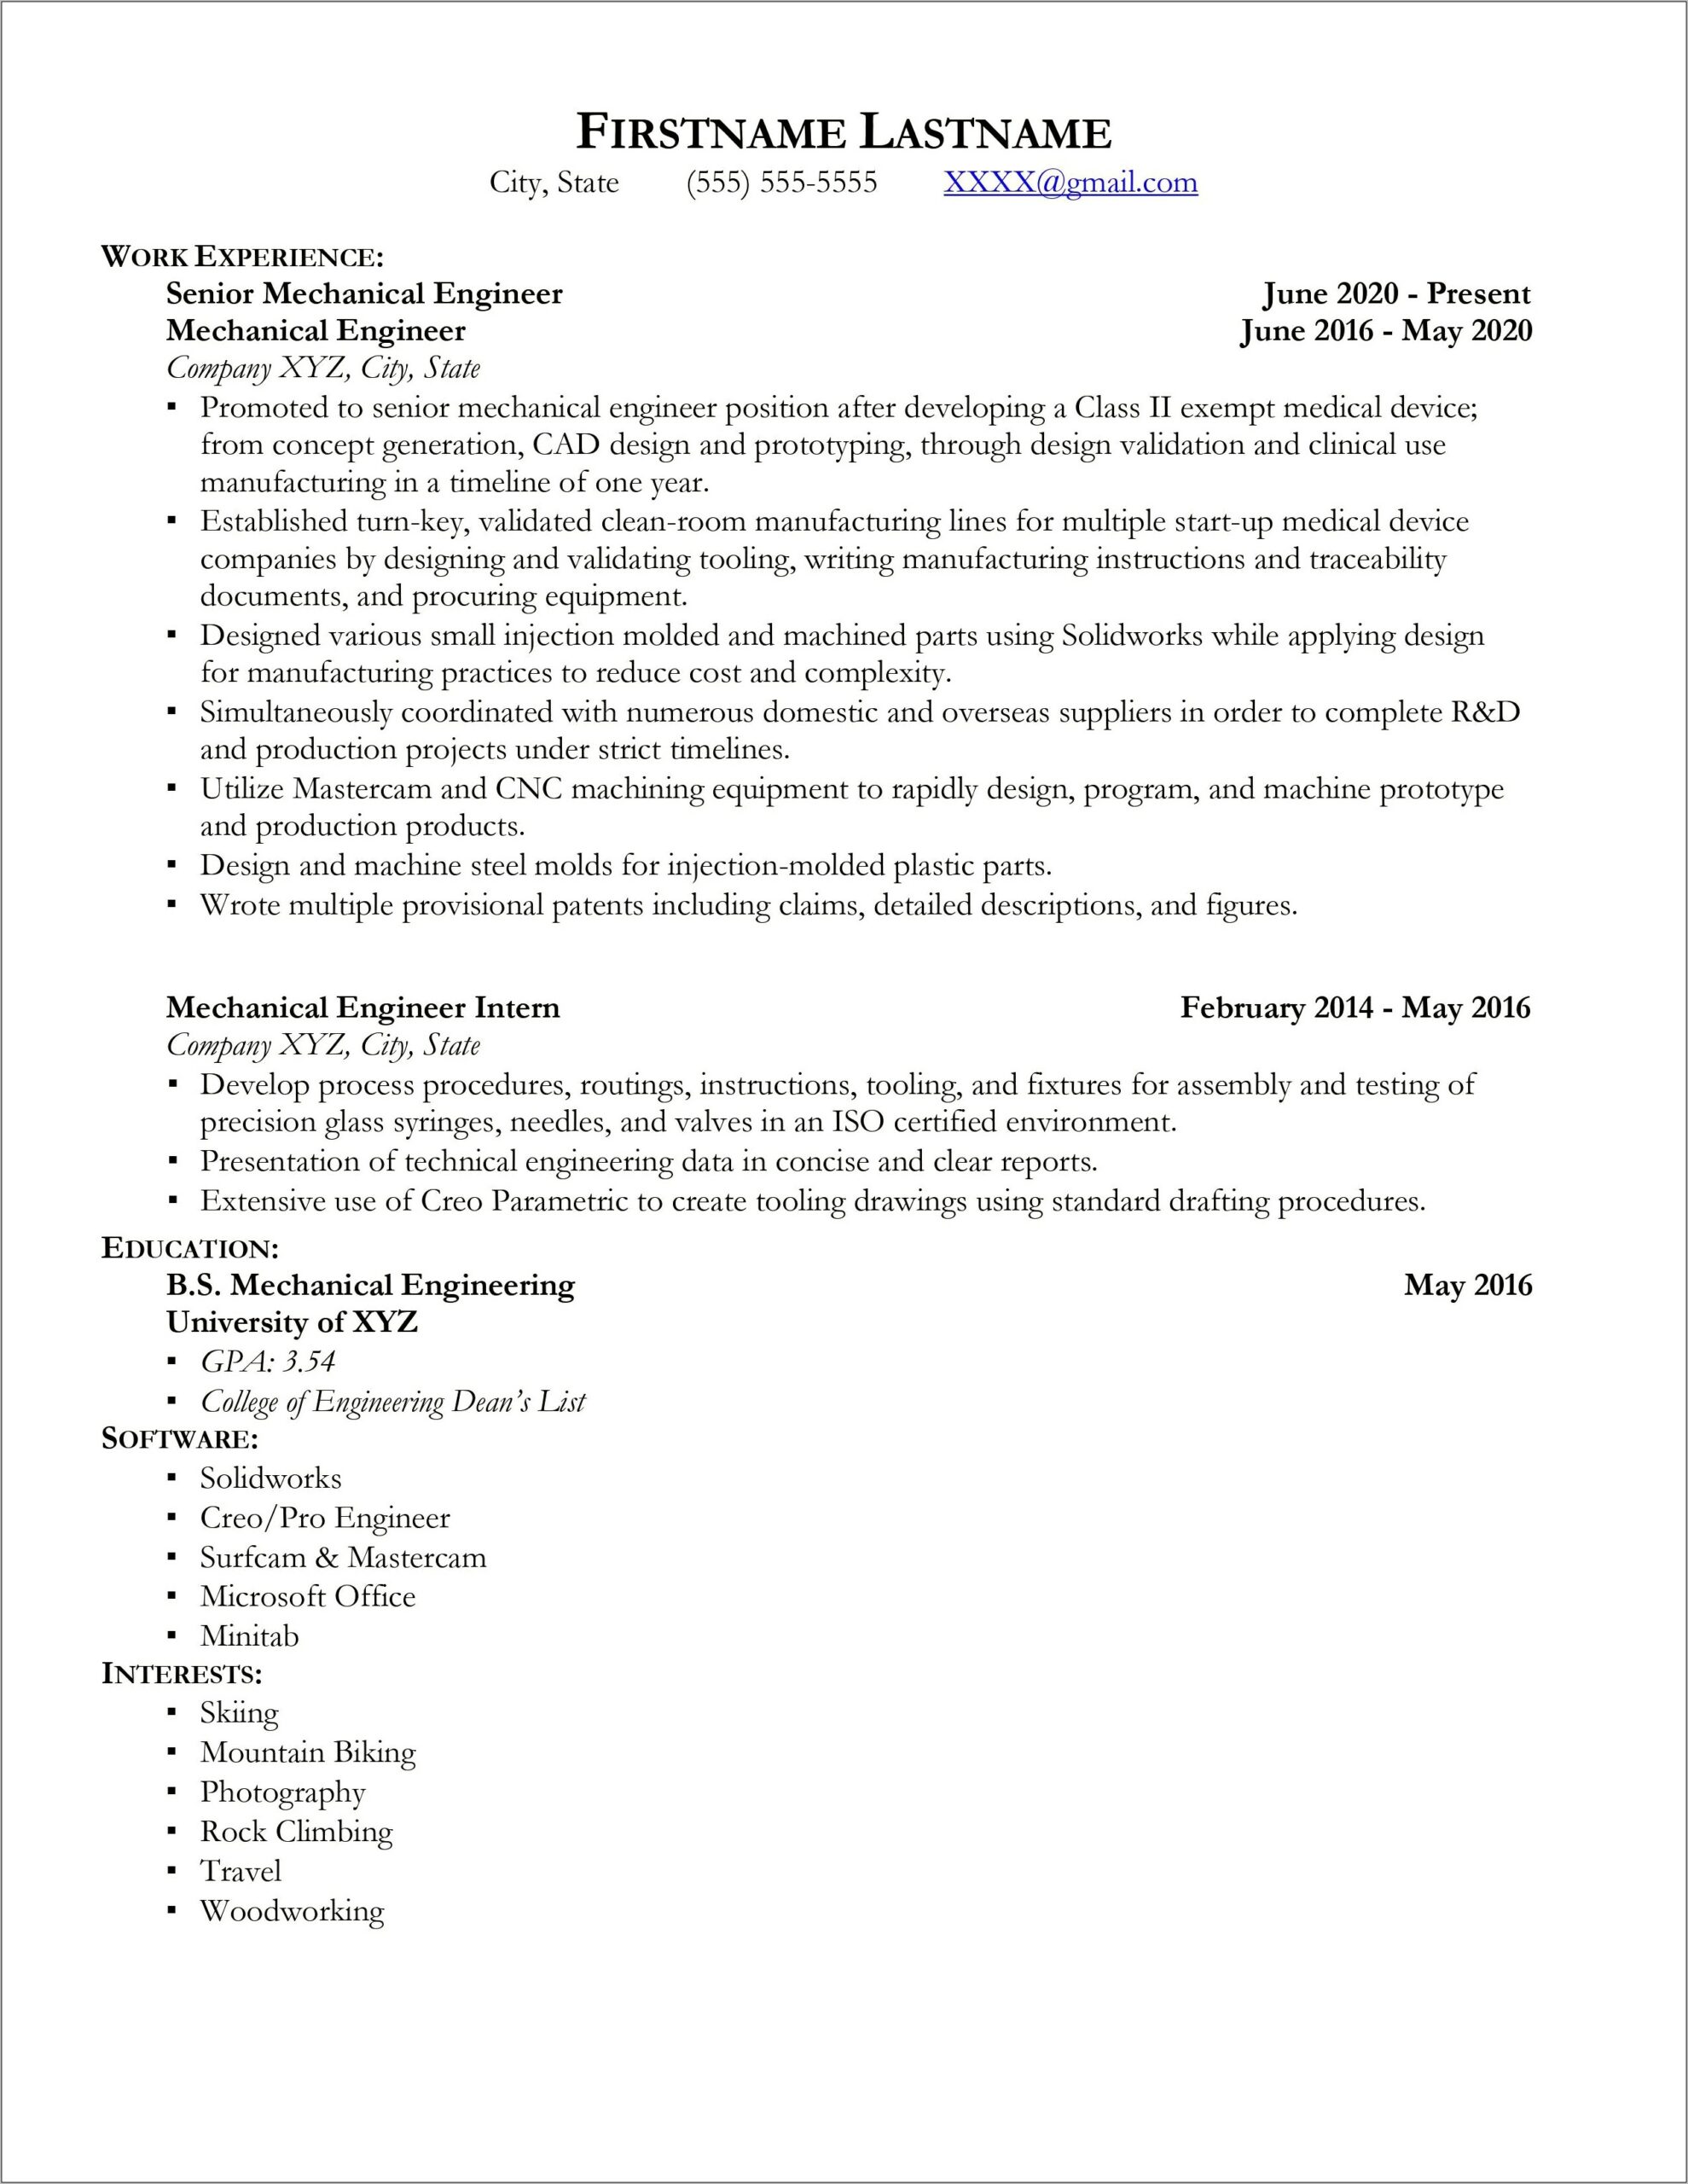 Resume To Apply For Second Job